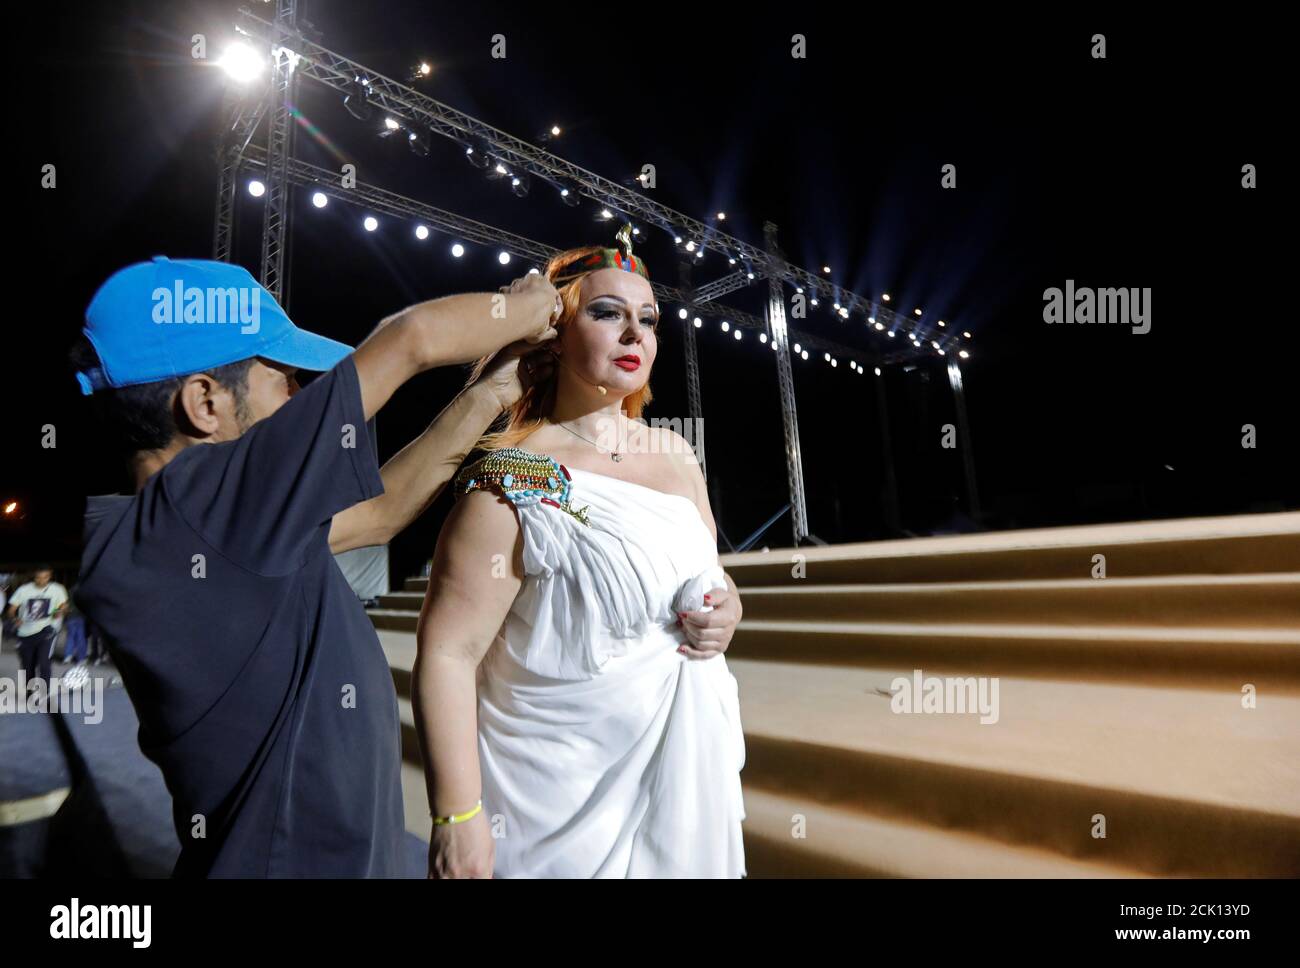 Eliska Weissova in the role of Amneris rehearses a scene for the opera 'Aida' originally set in the Old Kingdom of Egypt and composed by Giuseppe Verdi at the Temple of Queen Hatshepsut in West Bank of Luxor, Egypt, October 24, 2019. REUTERS/Amr Abdallah Dalsh Stock Photo